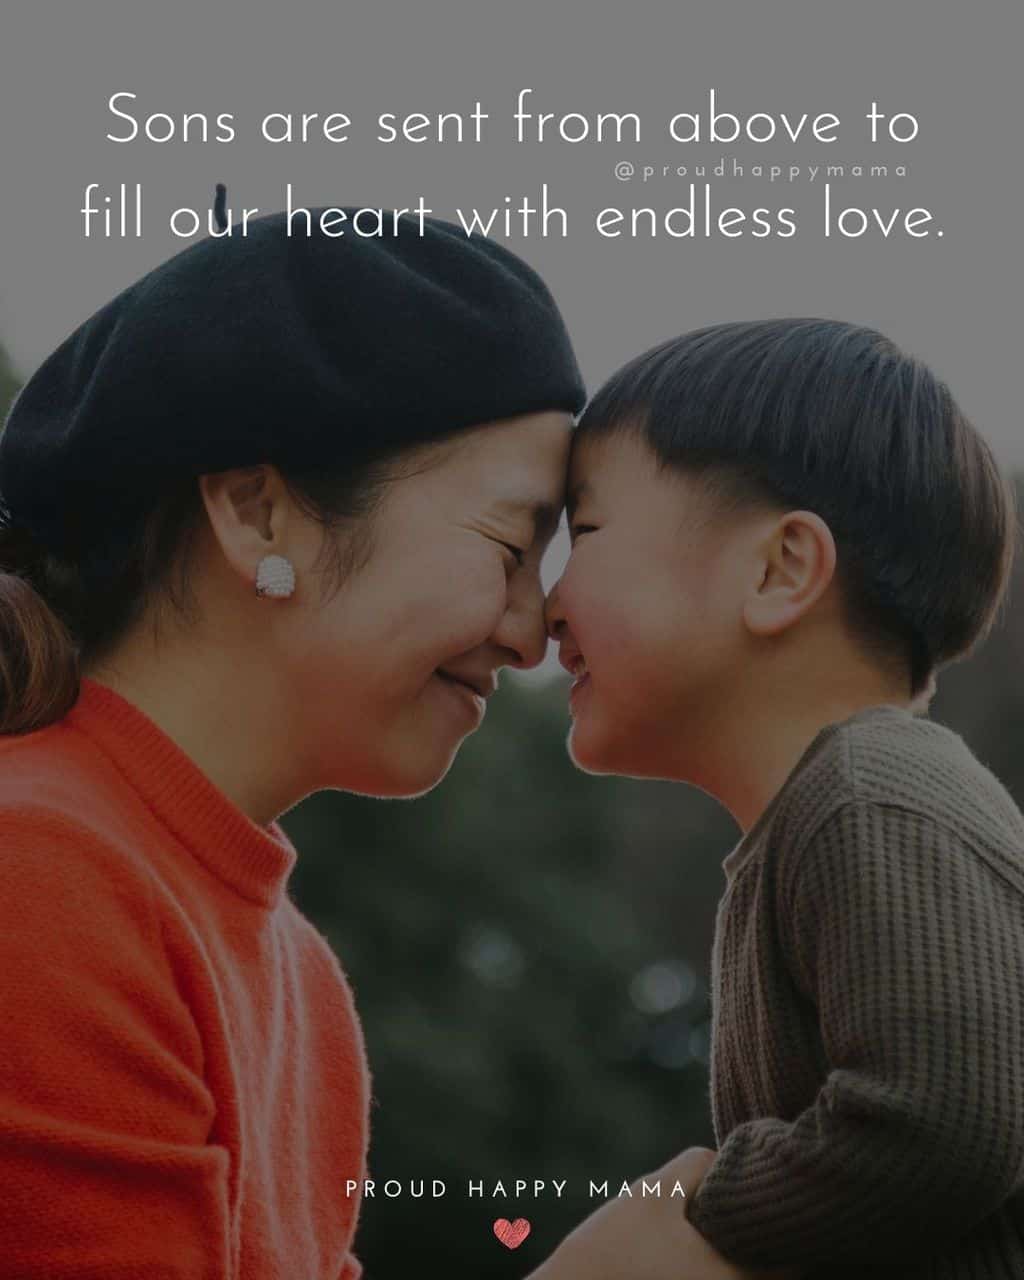 Son Quotes - Sons are sent from above to fill our heart with endless love.’